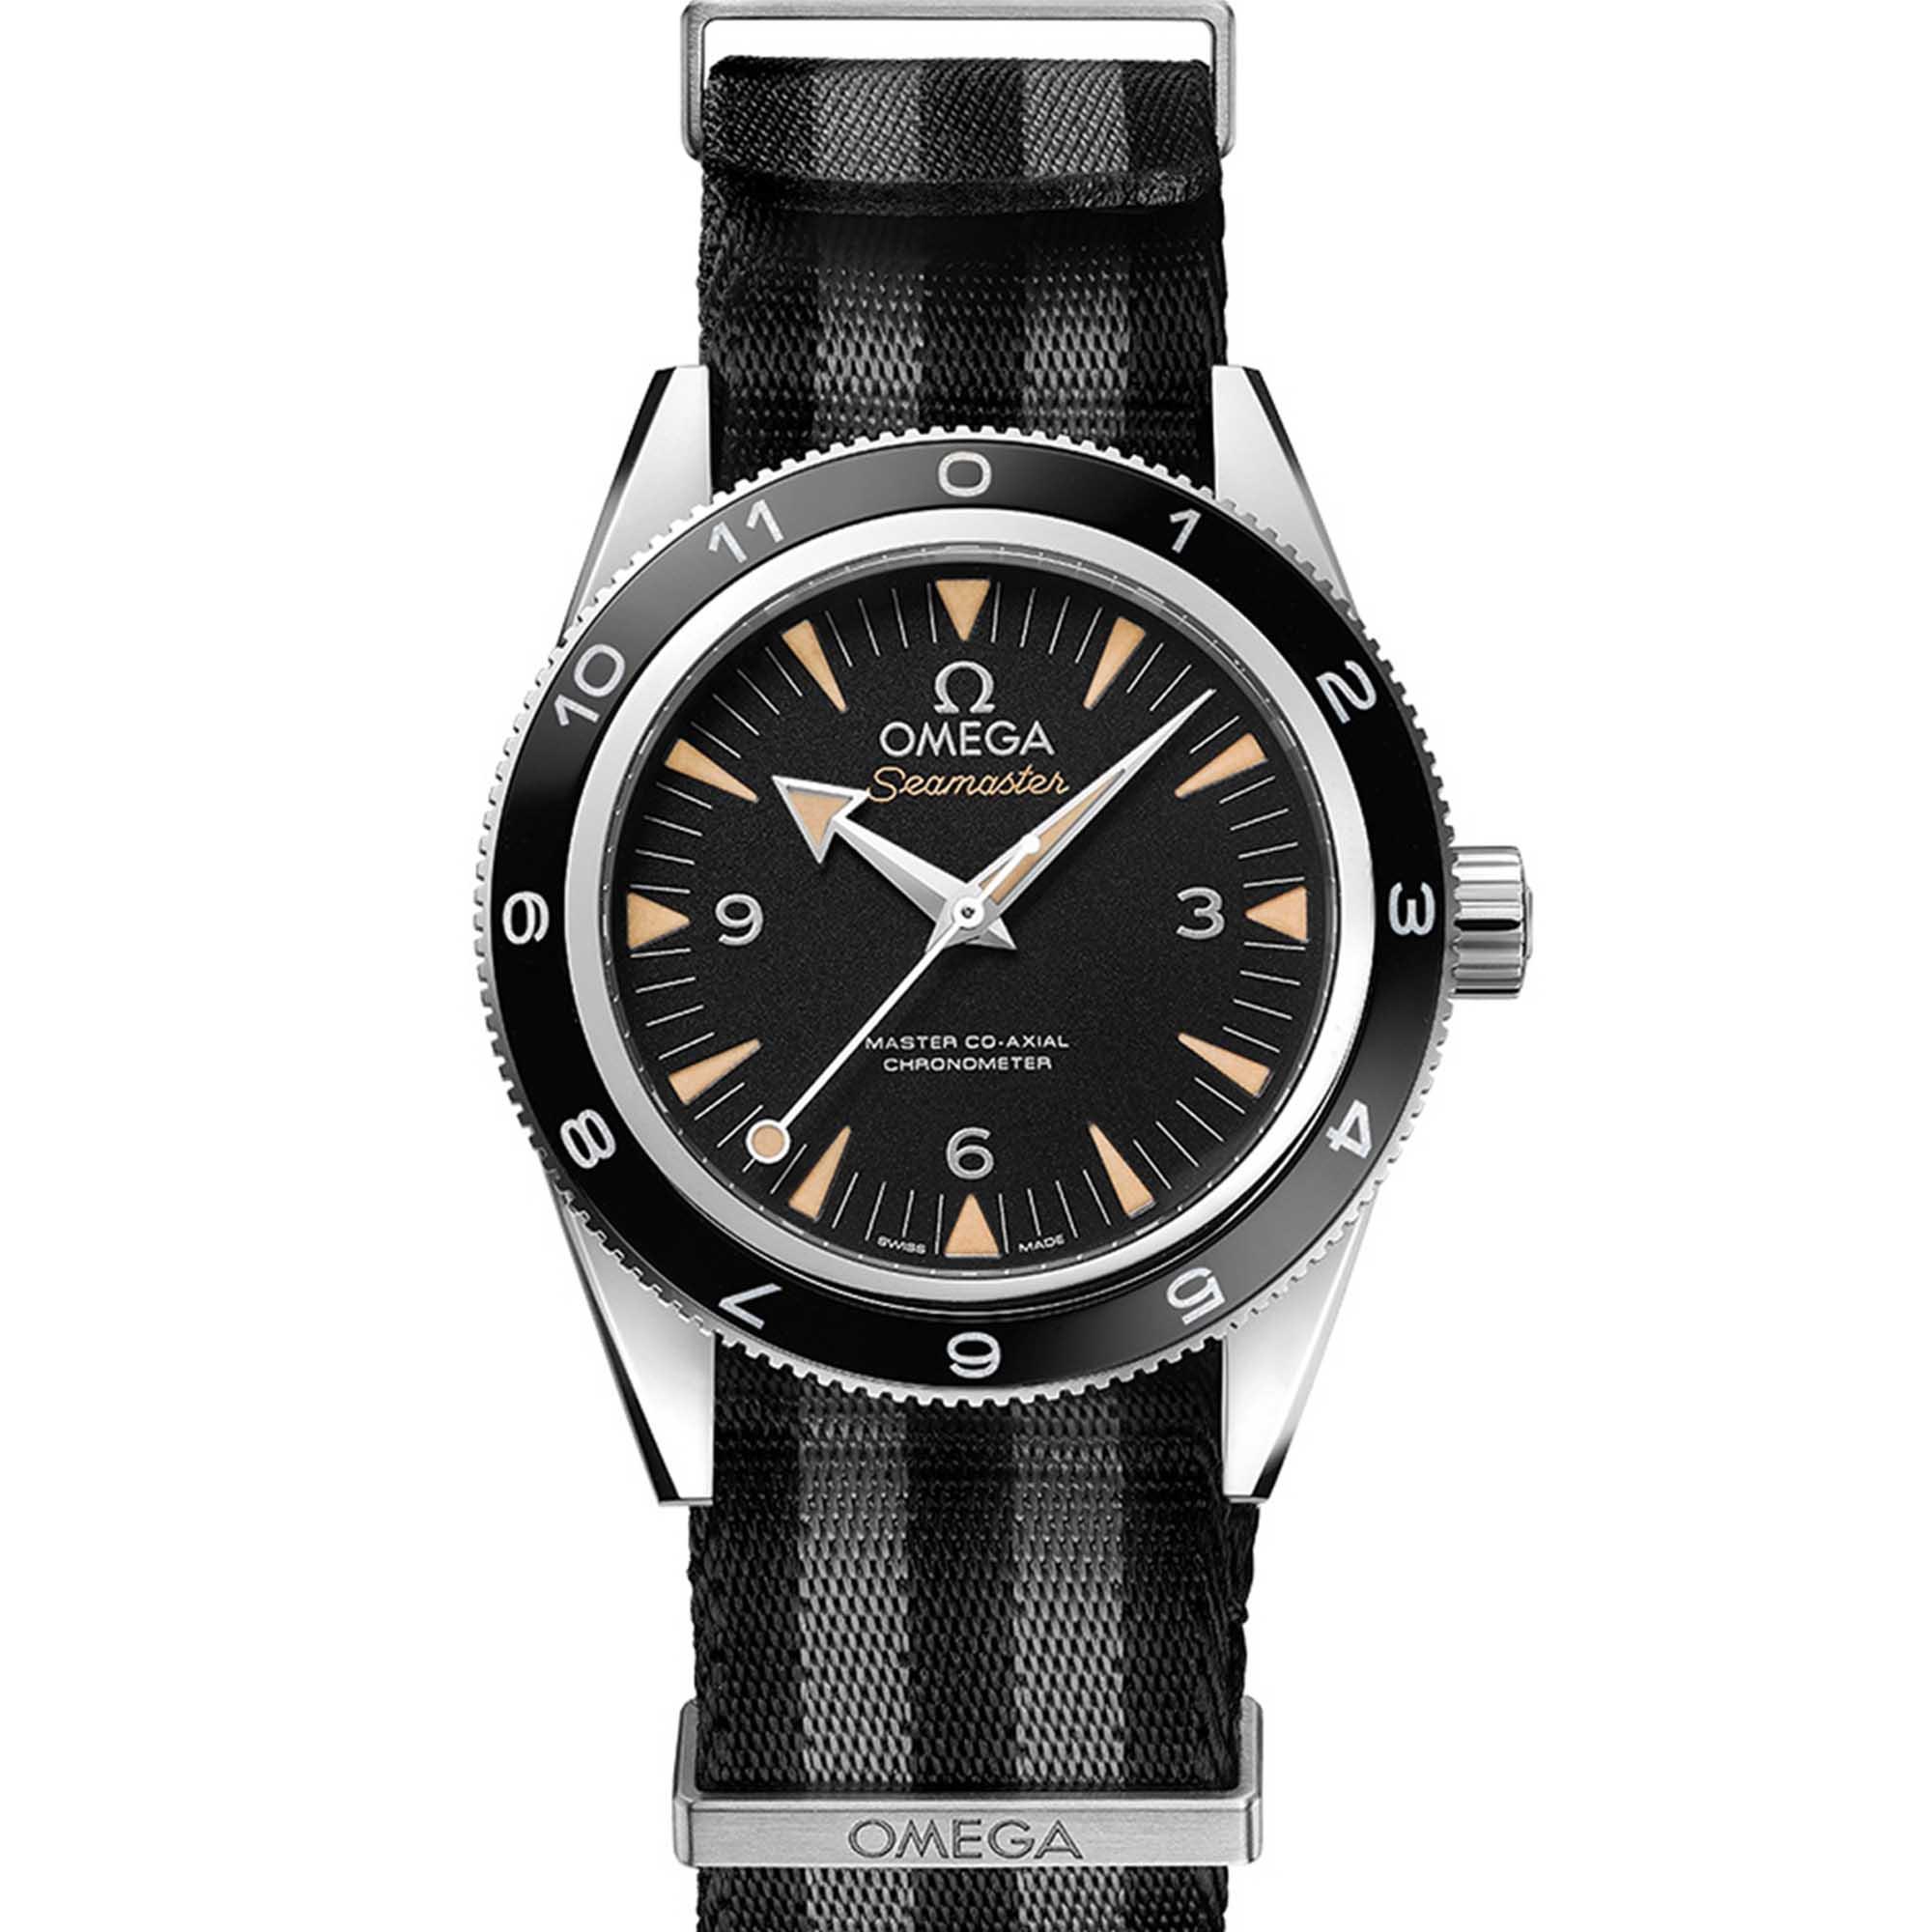 Omega - Seamaster 300 Master Co-Axial Chronometer "Spectre" Limited Edition